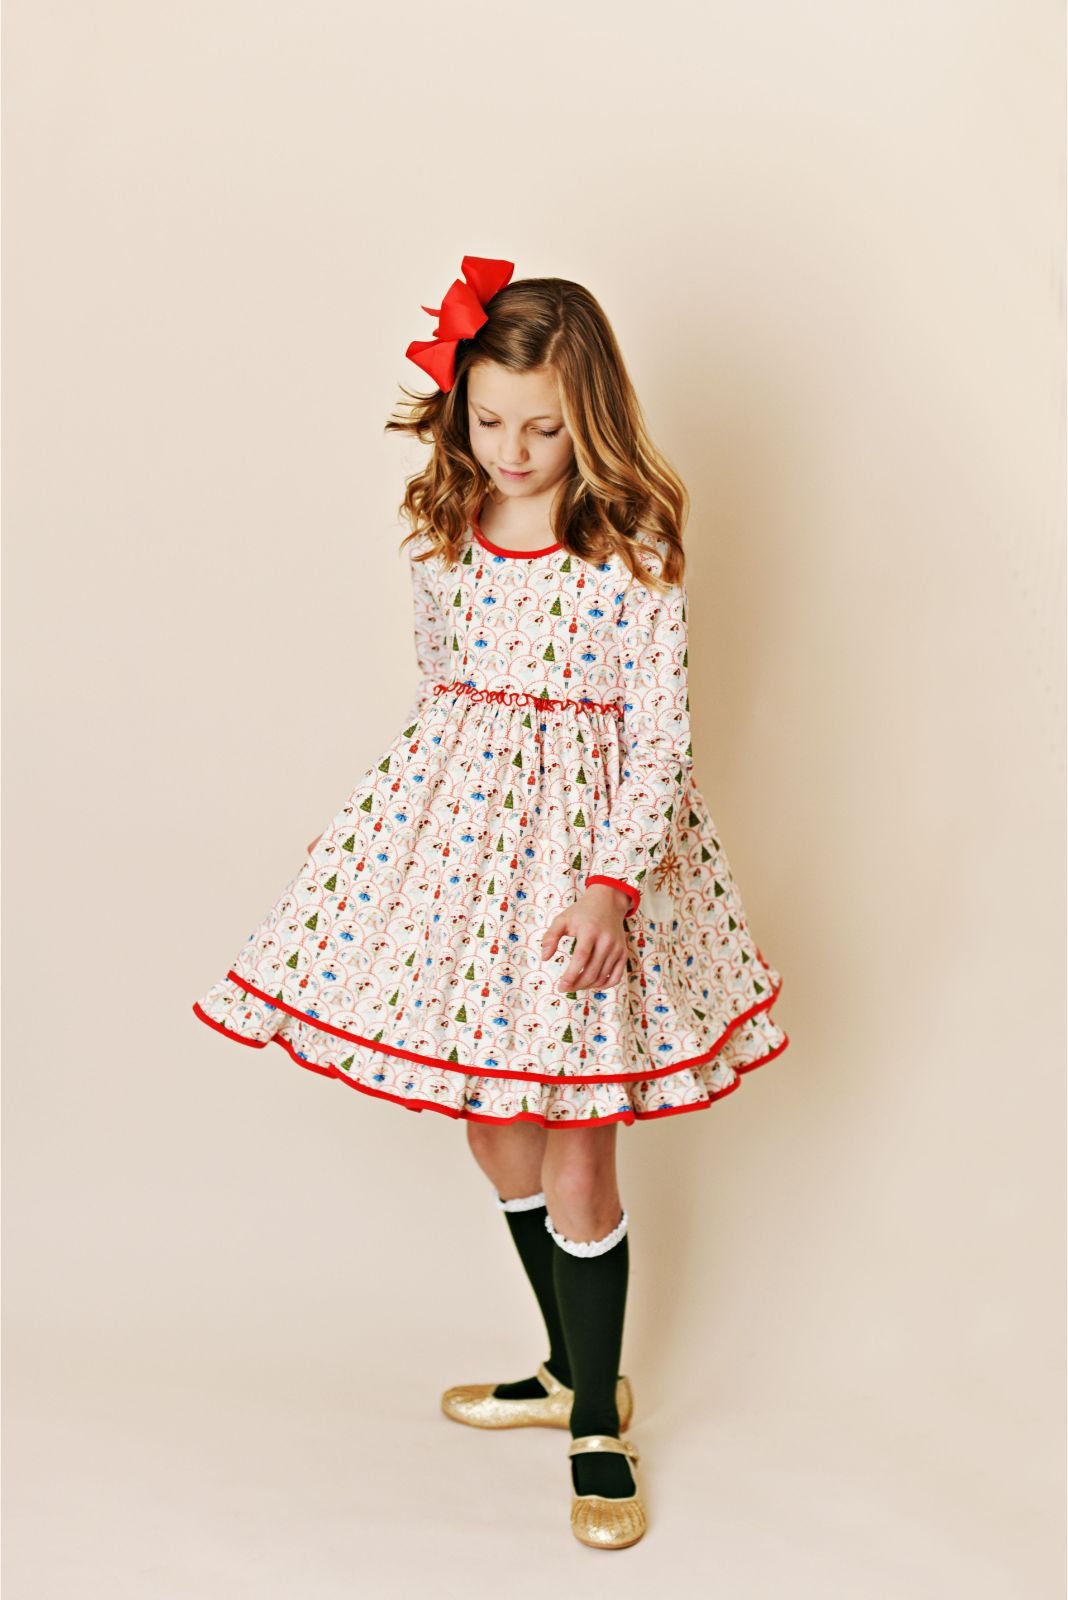 Swoon Baby Nutcracker Ballet Embroidery Pocket Dress Style 23-70